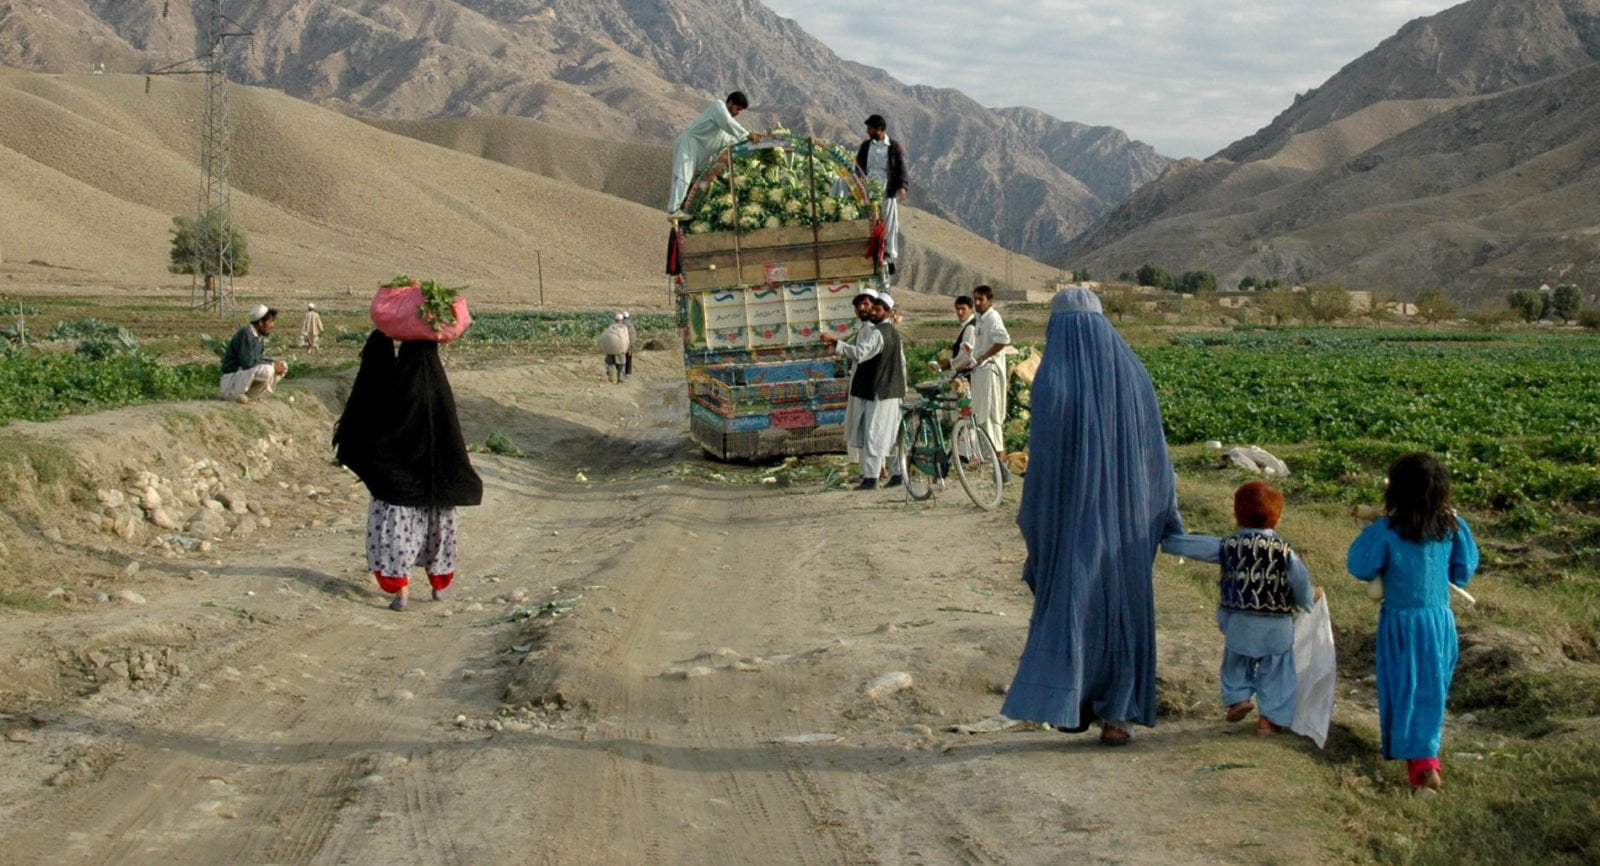 A woman and her family walking behind a cart in rural Afghanistan